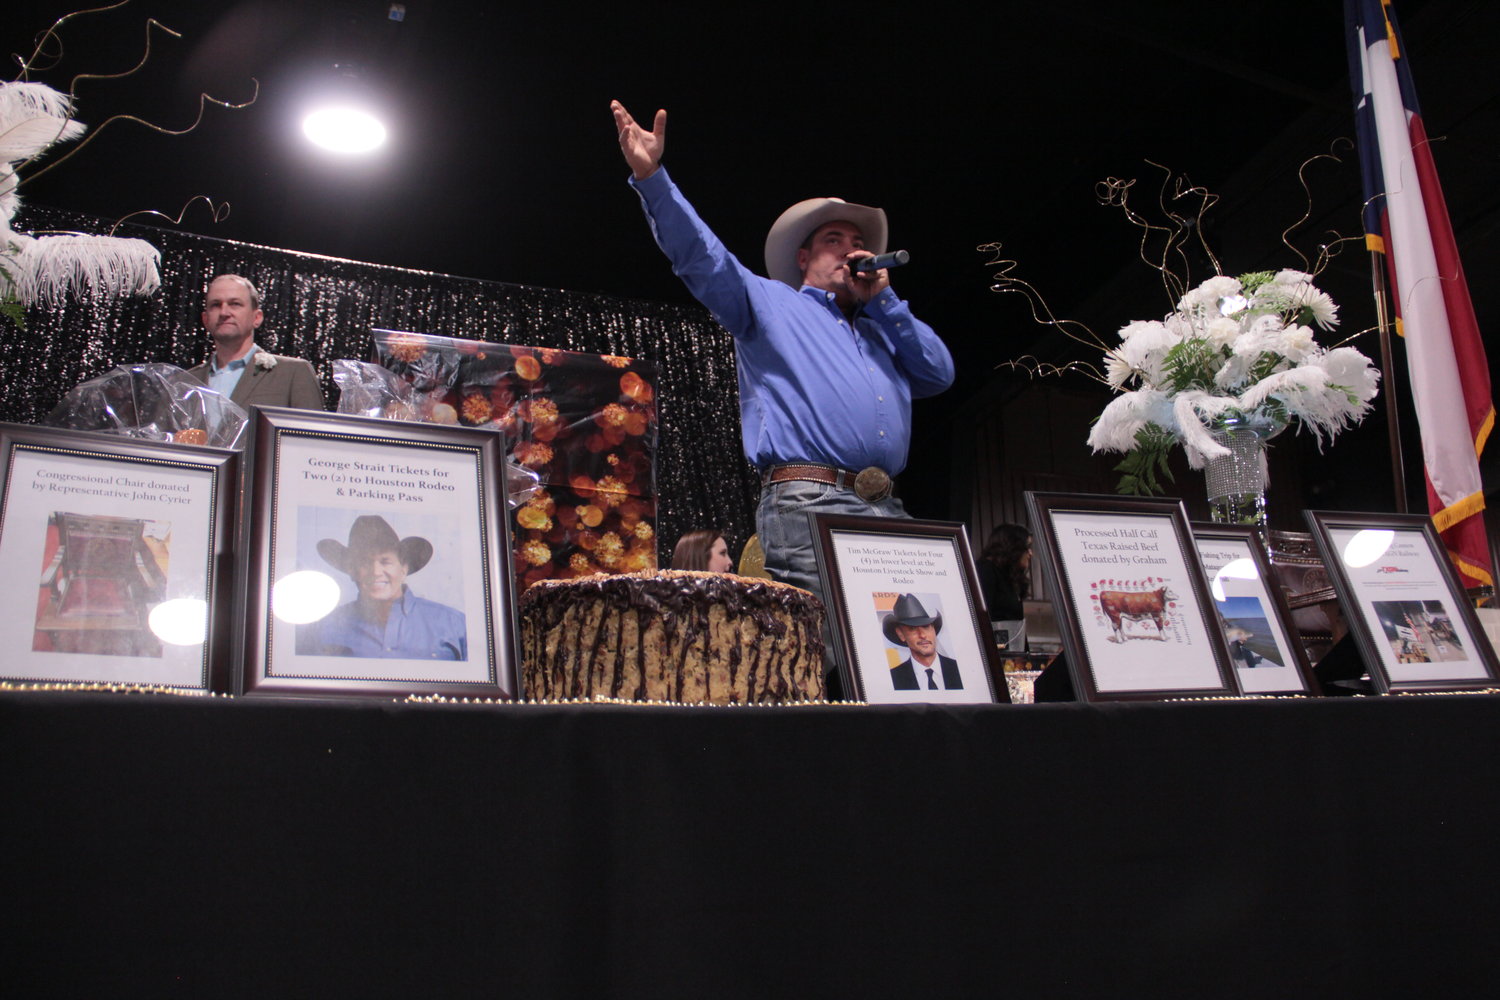 At Friday's annual chamber banquet, J.D. Shelton conducted a lively auction with assistance from emcee Egon Barthels. Items from Tim McGraw and George Strait tickets were available, as well as fishing trips, fresh beef, and a Texas Capitol chair donated by State Rep. John Cyrier.